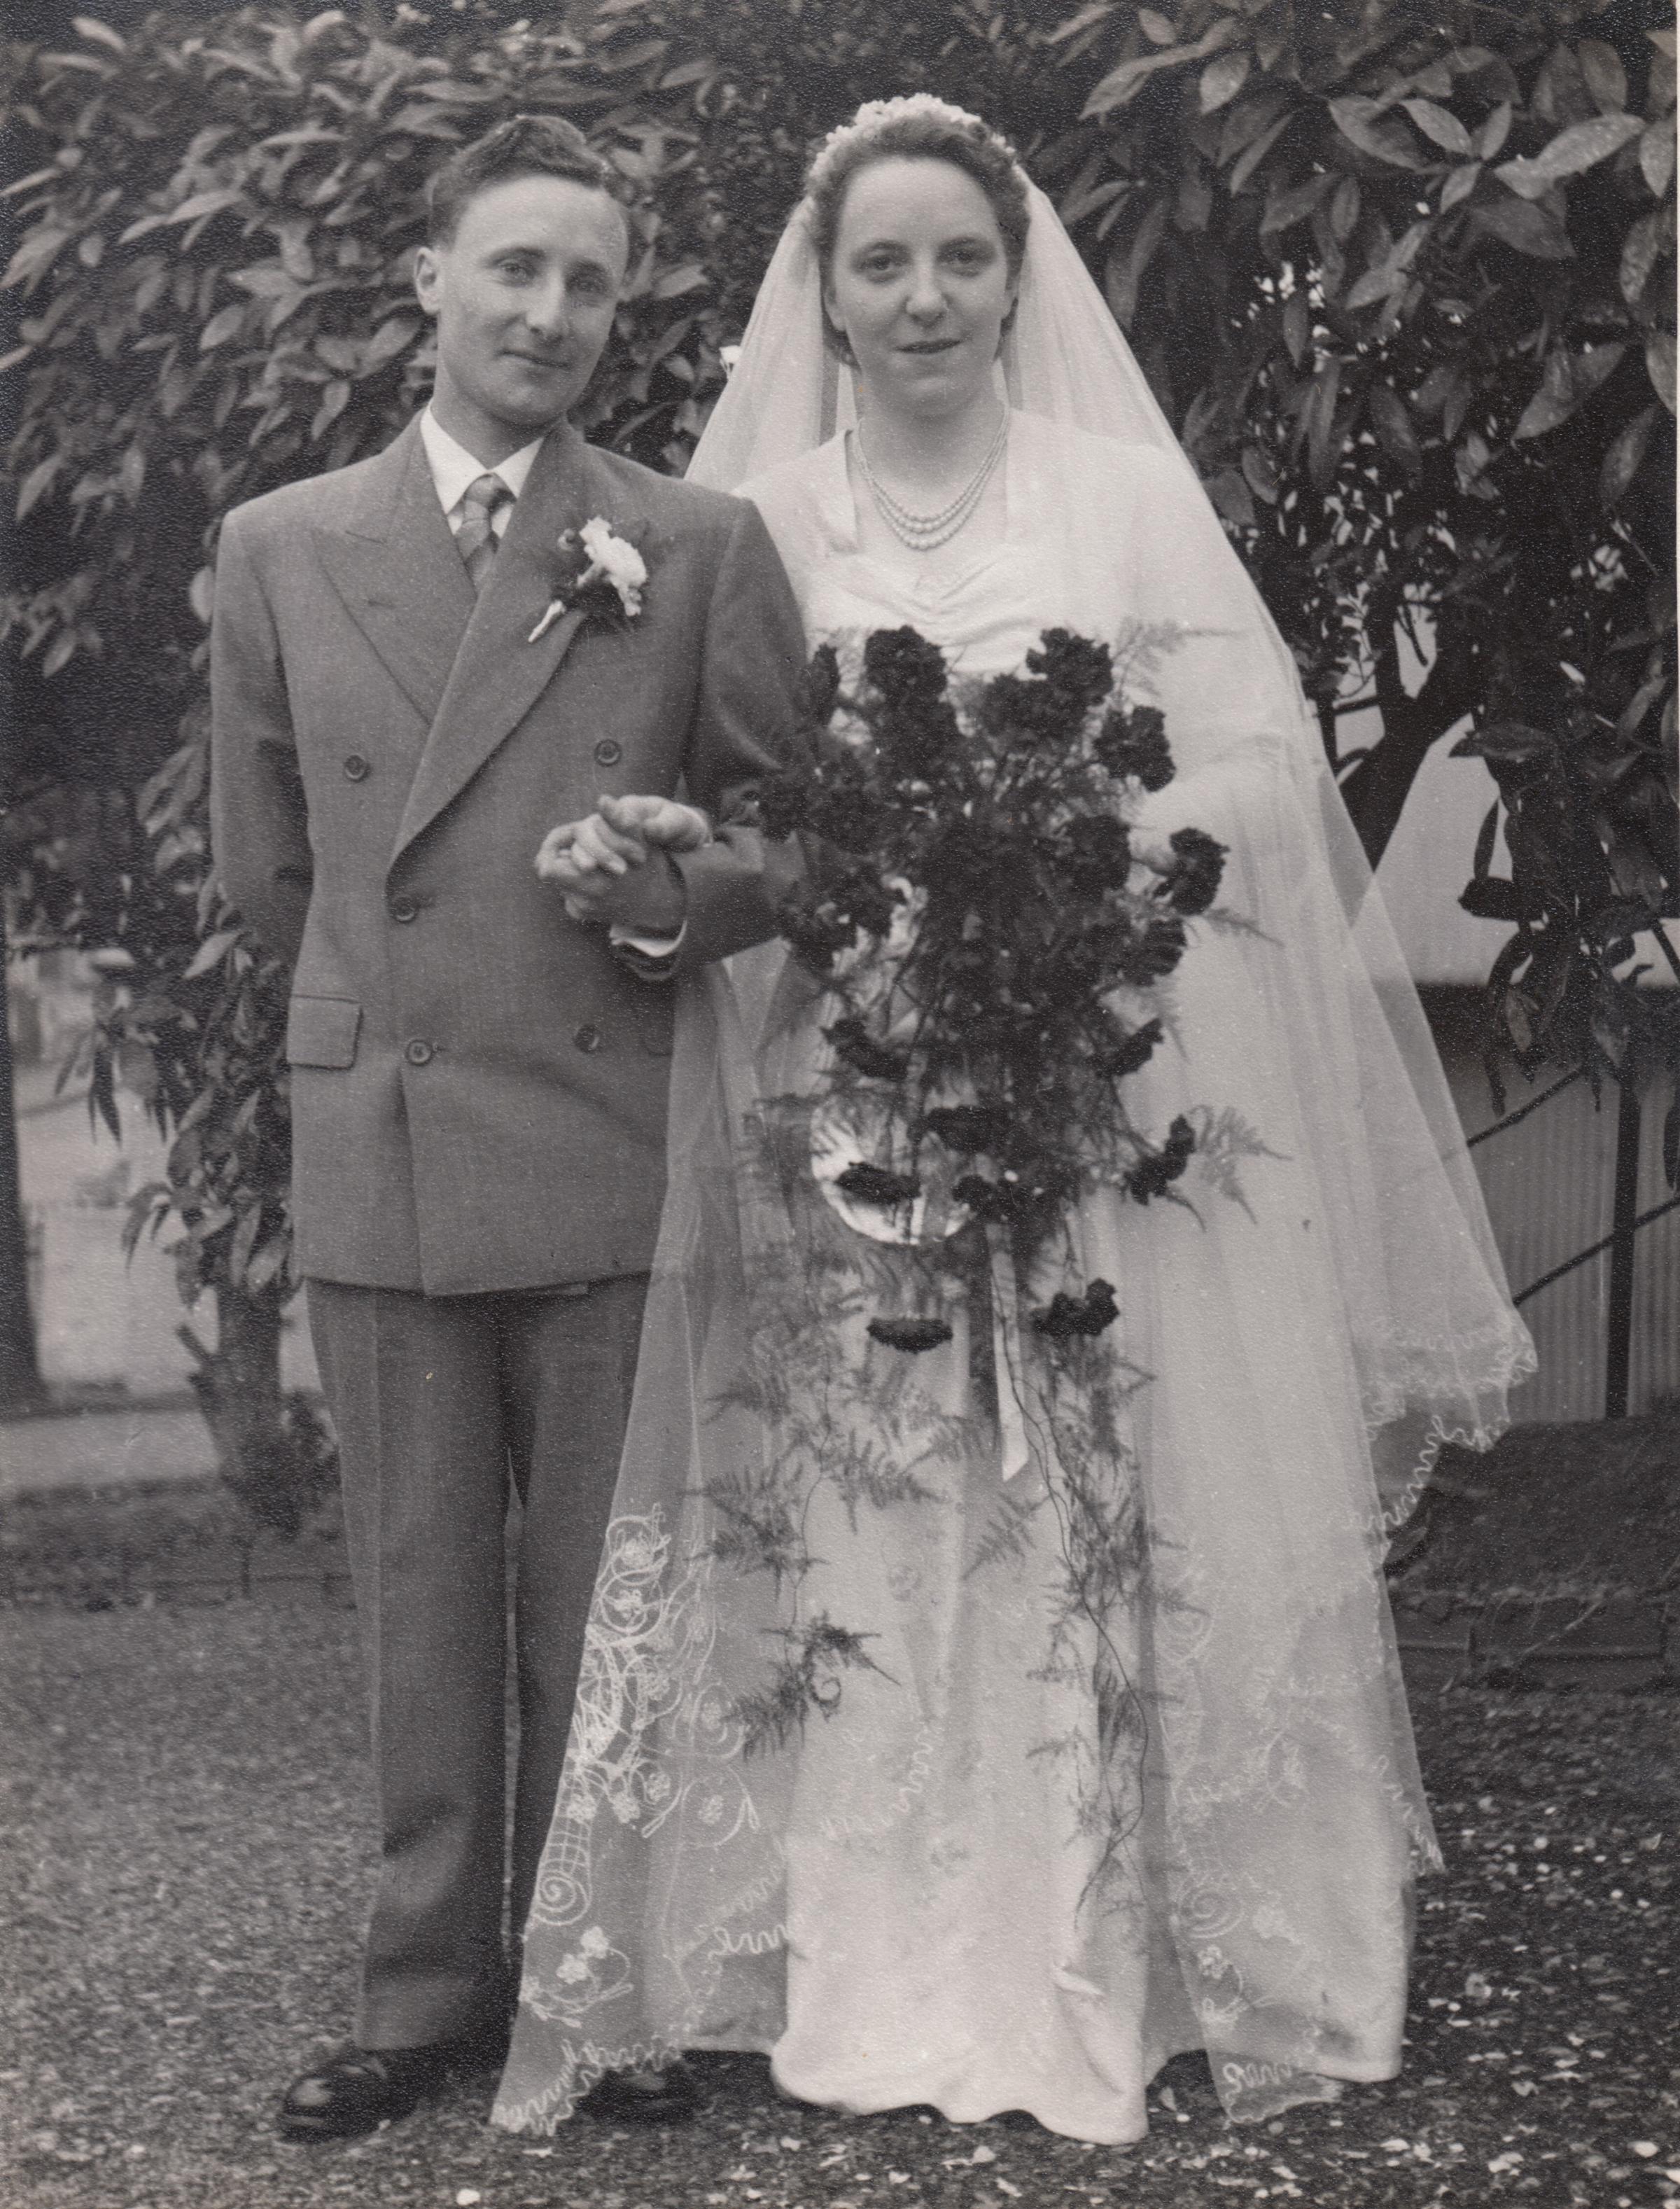 Iris and Philip Townsend on their wedding day in Bath in December 1953.